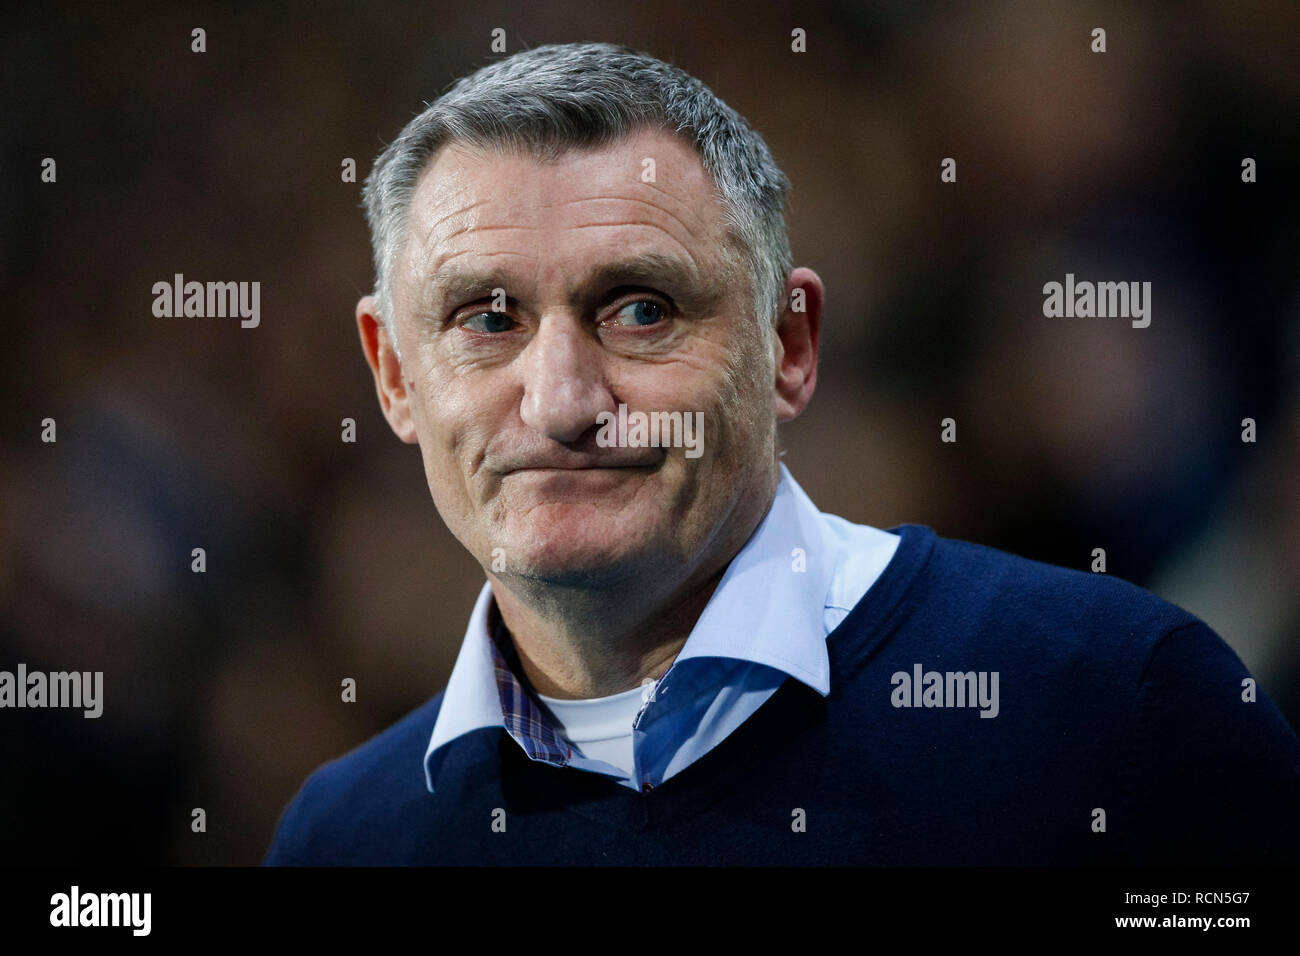 Blackburn, Lancashire, UK. 15th Jan 2019. Blackburn Rovers Manager Tony Mowbray during the FA Cup Third Round replay between Blackburn Rovers and Newcastle United at Ewood Park on January 15th 2019 in Blackburn, England. (Photo by Daniel Chesterton/phcimages.com) Credit: PHC Images/Alamy Live News Stock Photo